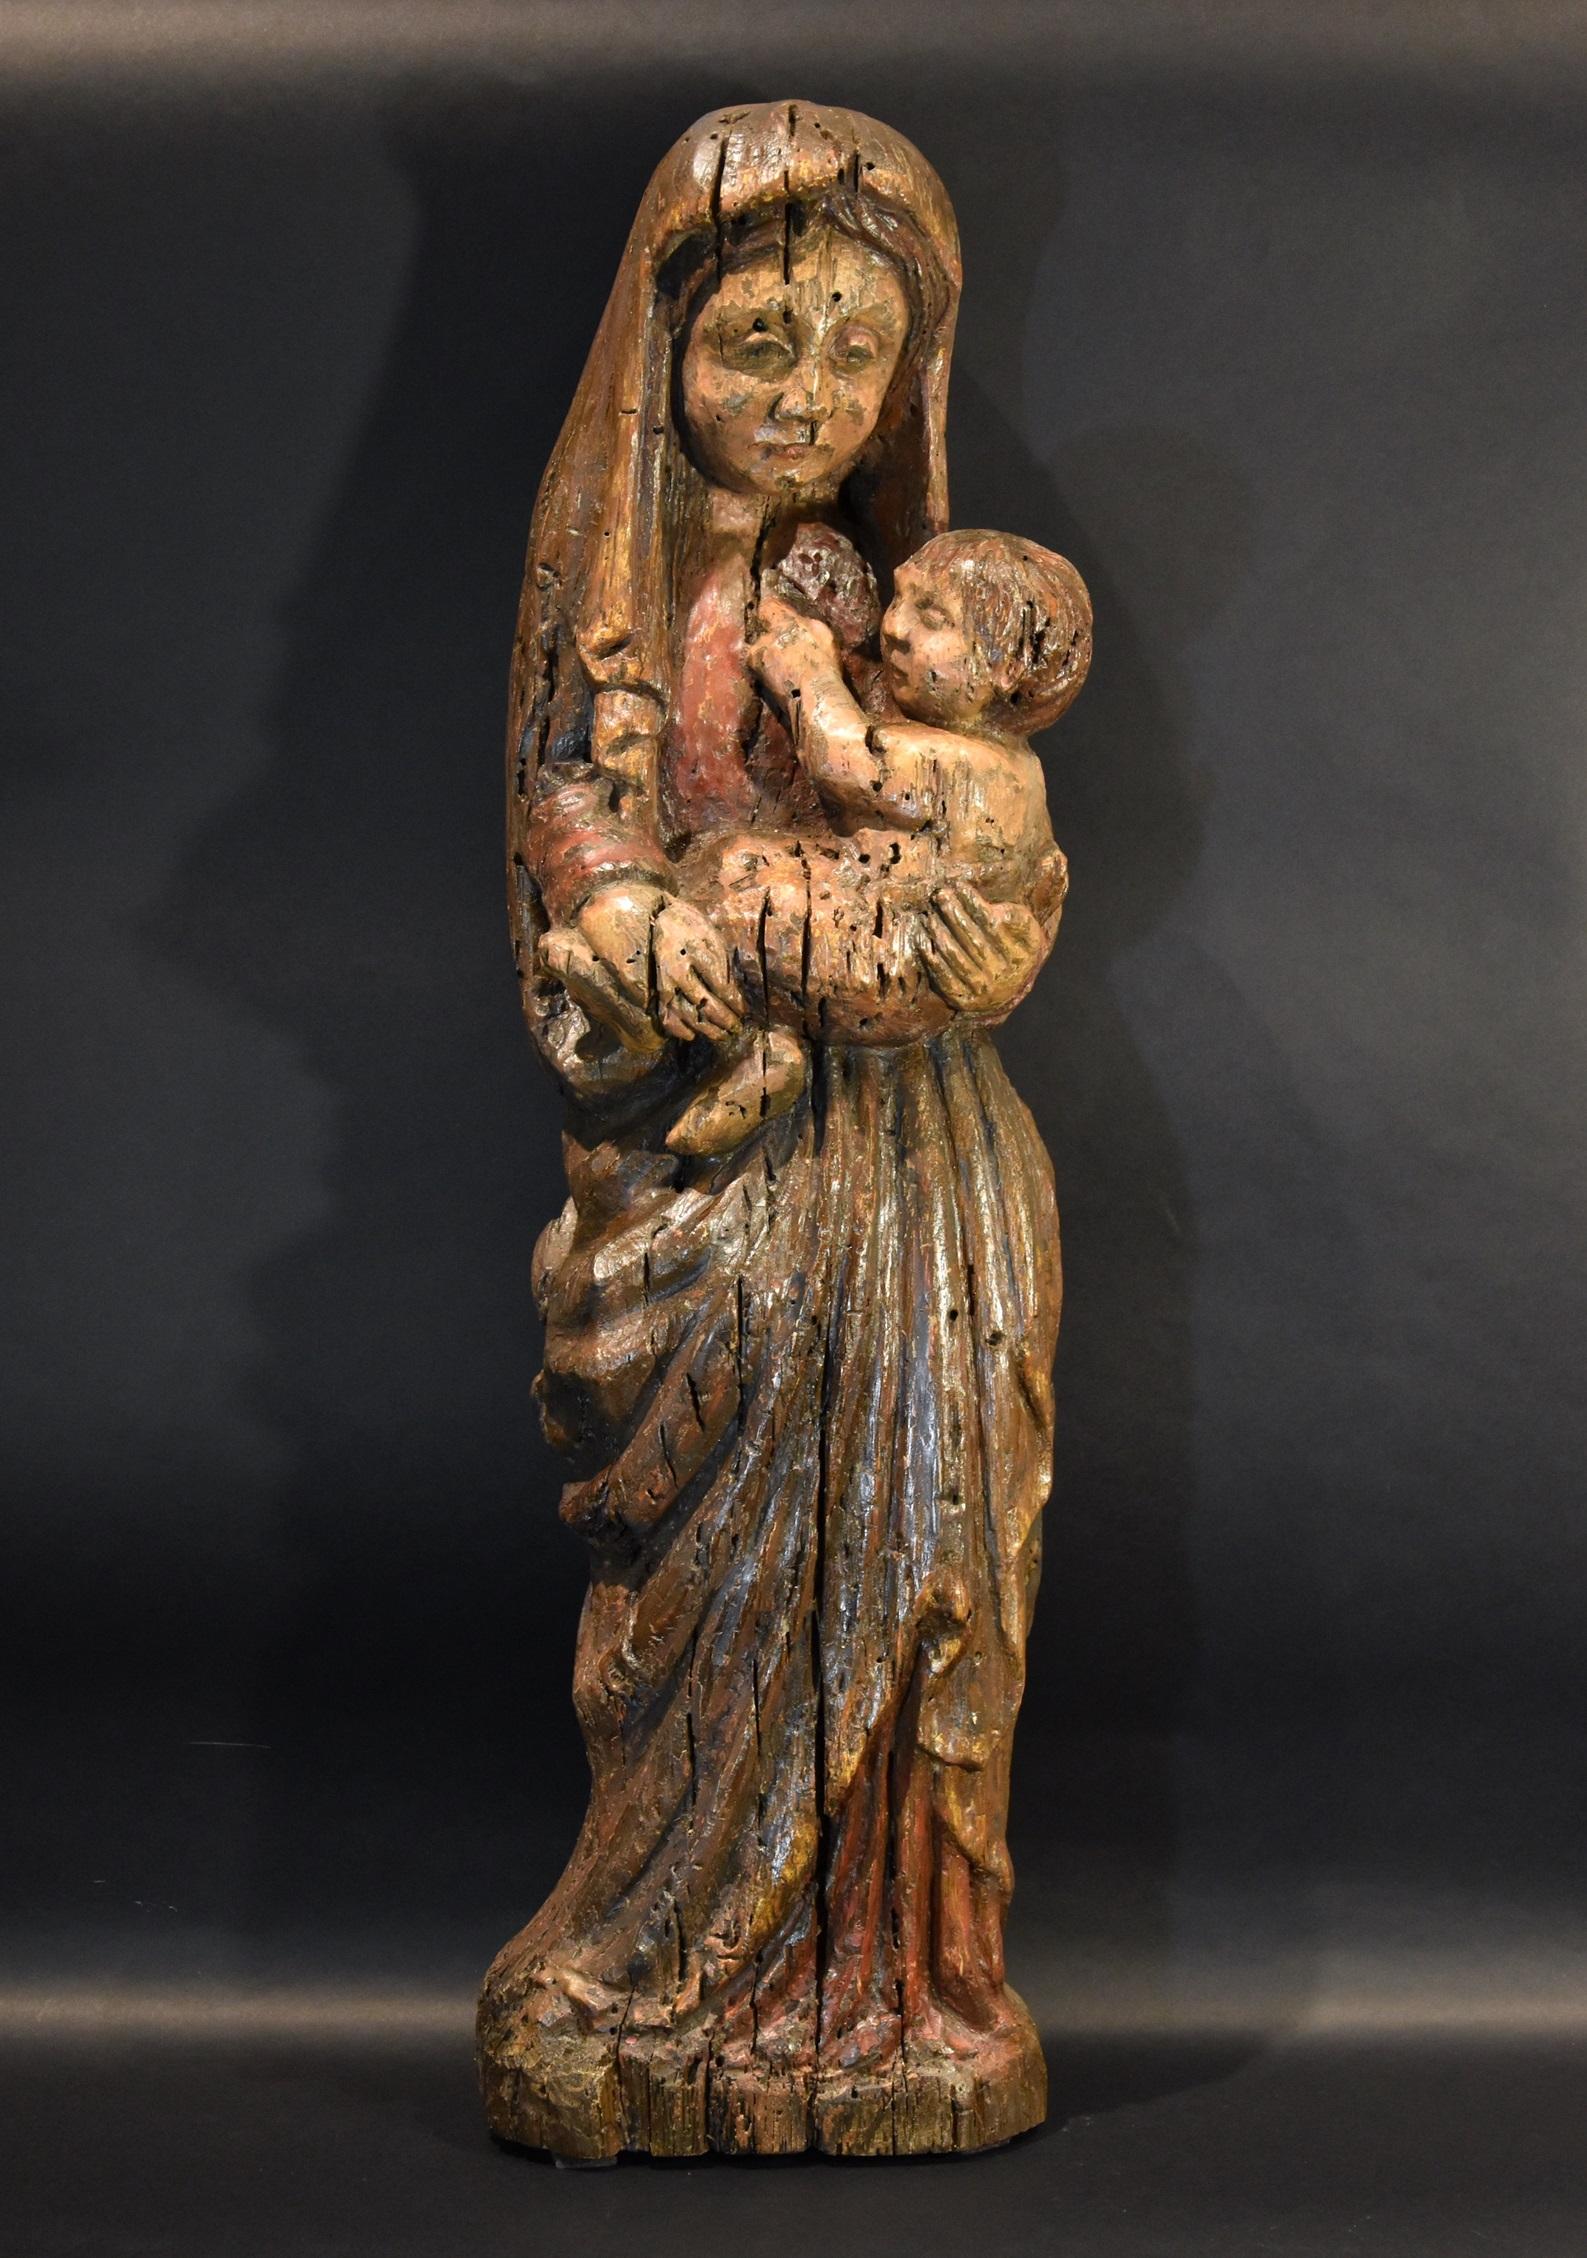 Virgin and Child

Franco-Spanish sculptor from the Catalan/Pyrenean area
Late Middle Ages, 13th-14th century

Carved oak, flat back

Height: 67 cm

Fascinating and rare wooden sculpture depicting the full-length Virgin holding the Child with her